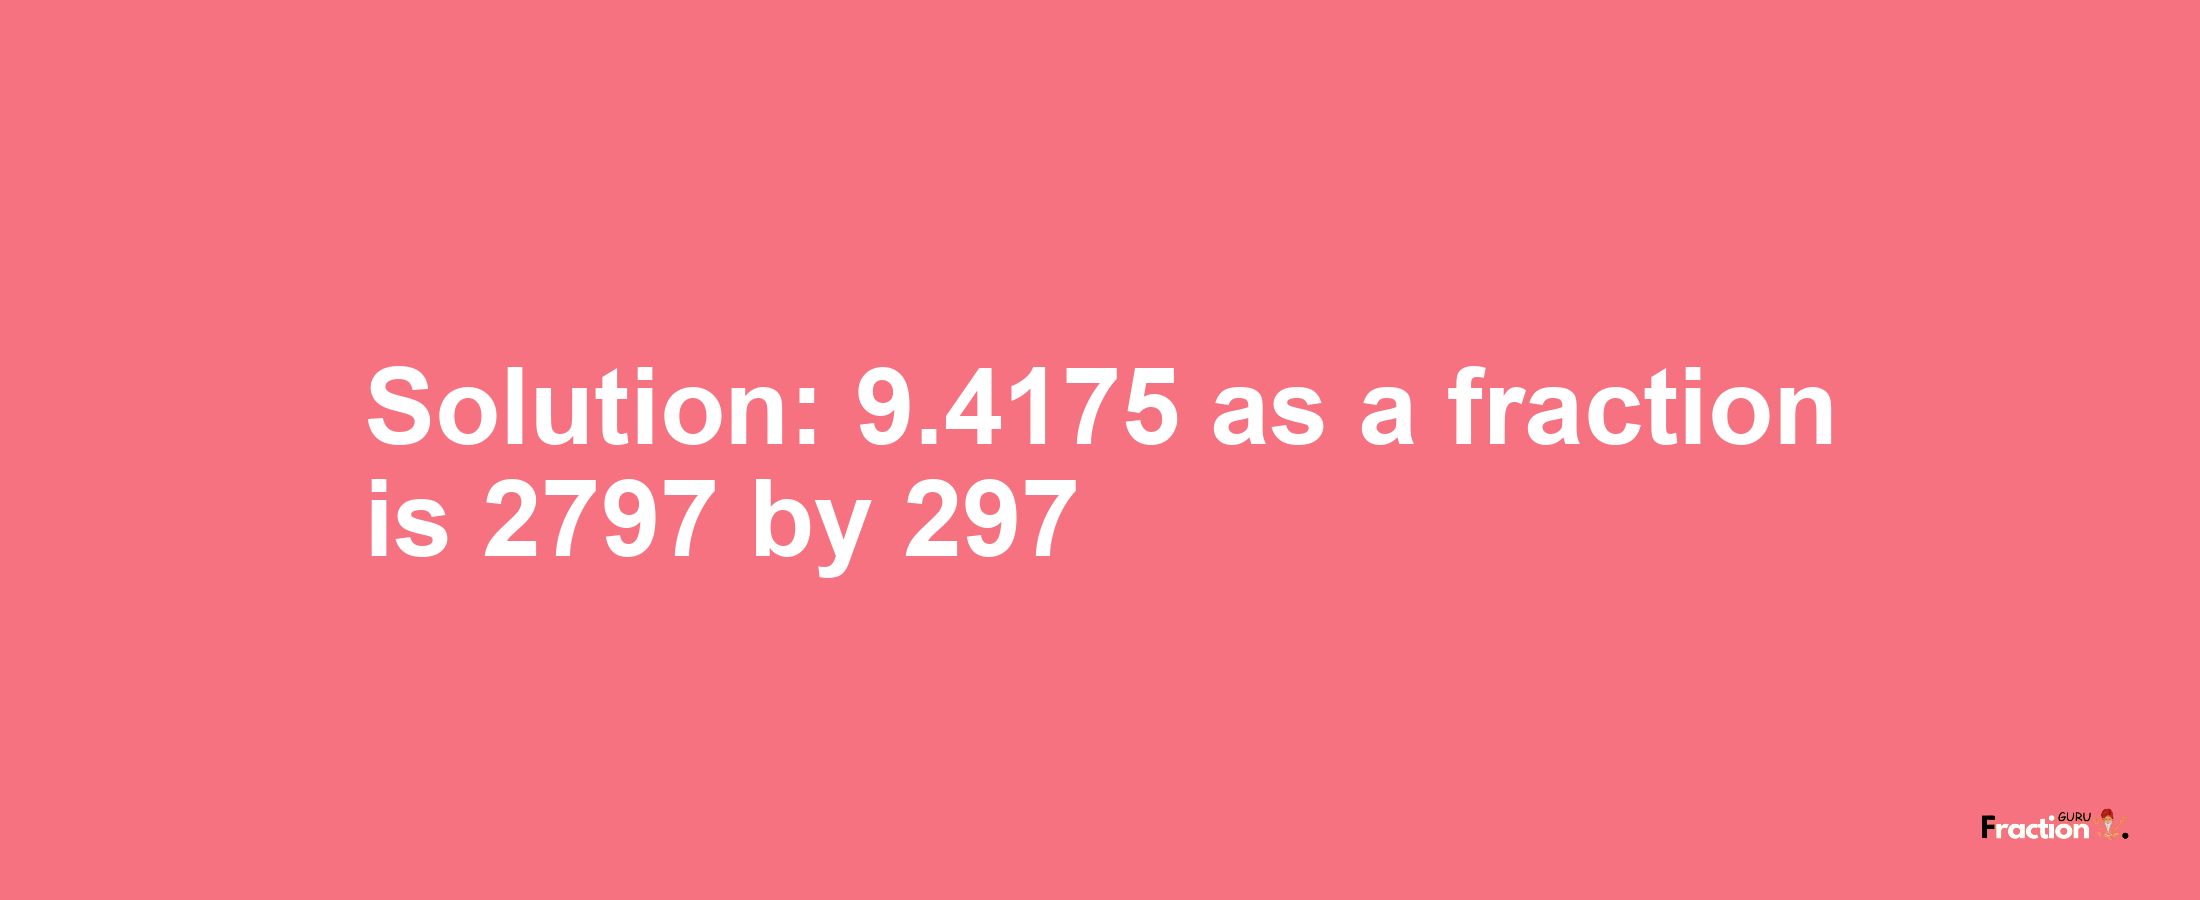 Solution:9.4175 as a fraction is 2797/297